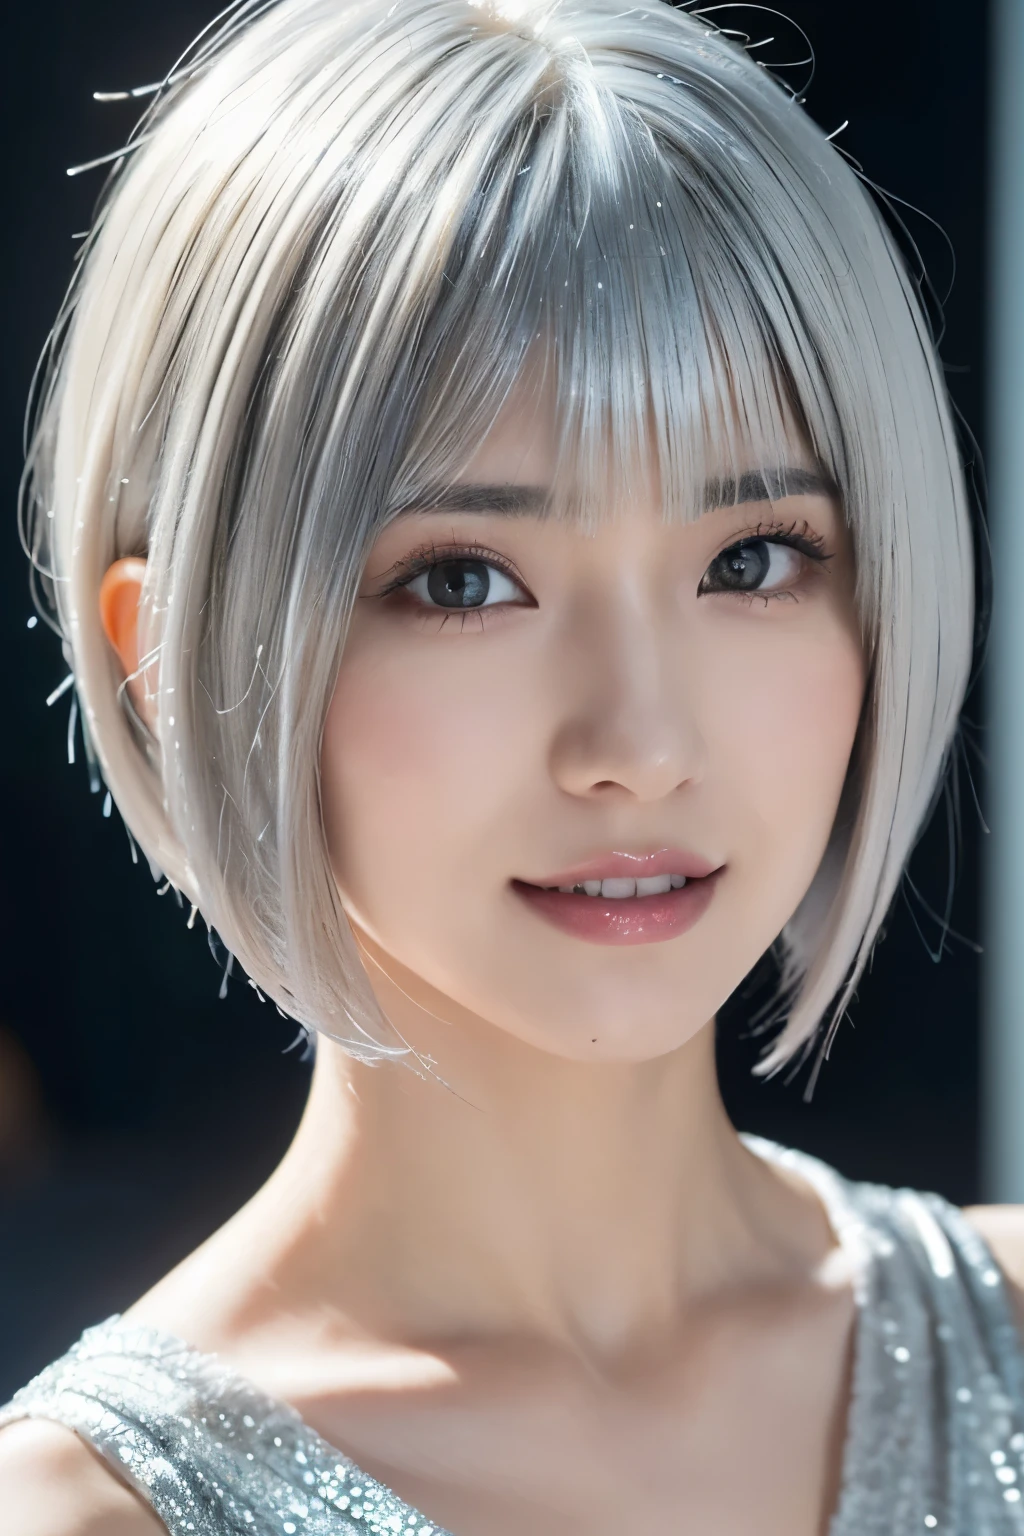 One Girl, (White underwear:1.2),((Face close-up:1.4))、((A little darker makeup:1.3))、 ((Short bob cut with silver hair:1.6))、(RAW Photos, highest quality), (Realistic, Realistic:1.4), Tabletop, Very delicate and beautiful, Very detailed, 2k wallpaper, wonderful, In detail, Very detailed CG Unity 8k wallpaper, Very detailedな, High resolution, Soft Light, Beautiful detailed girl, Very detailedな目と顔, Beautiful and detailed nose, Beautiful details, Cinema Lighting, City lights at night, Perfect Anatomy, Slender body, smile